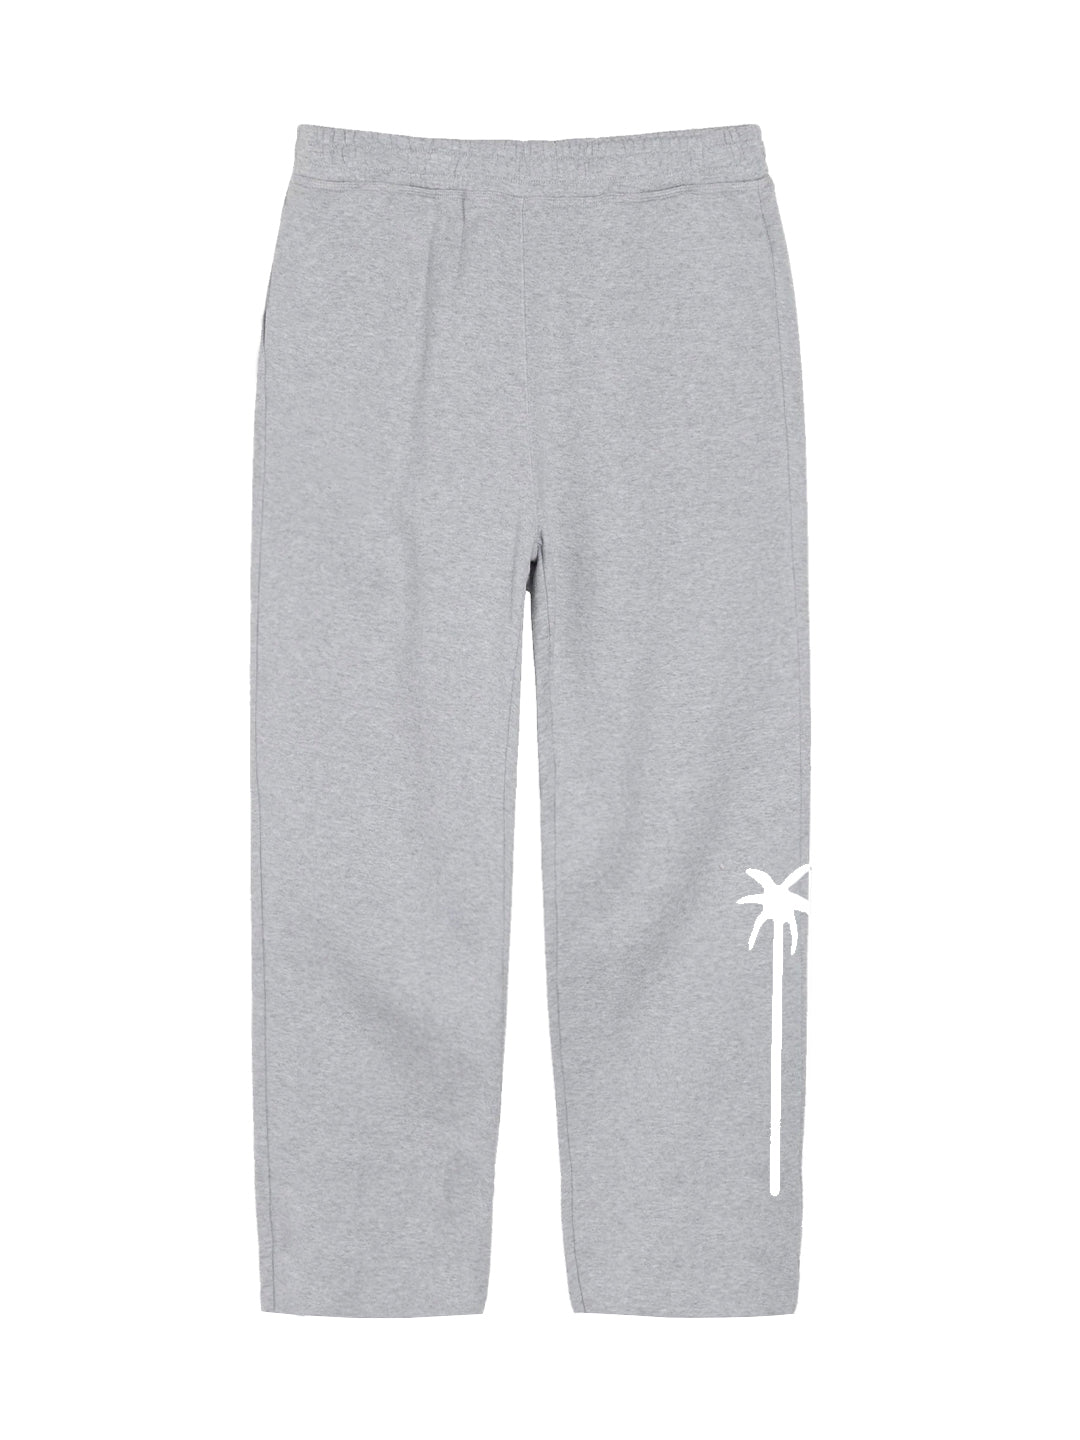 Actyve Volleyball Sweatpant in Heather Grey